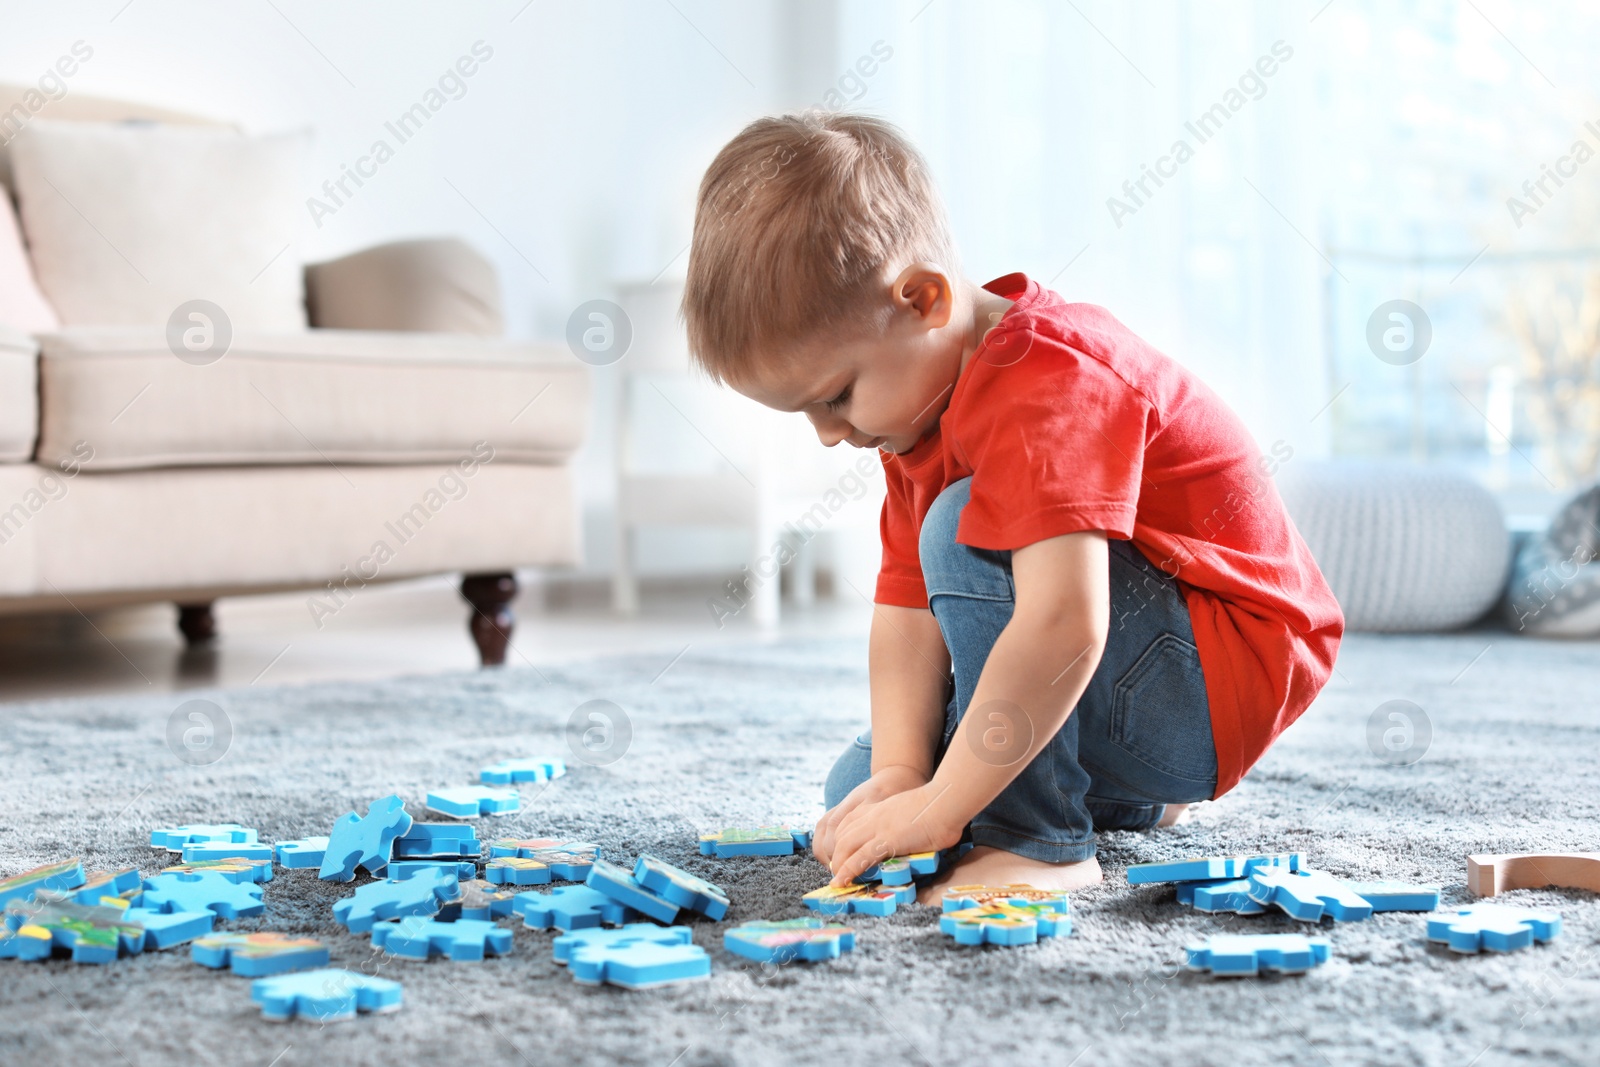 Photo of Cute little child playing with puzzles on floor indoors